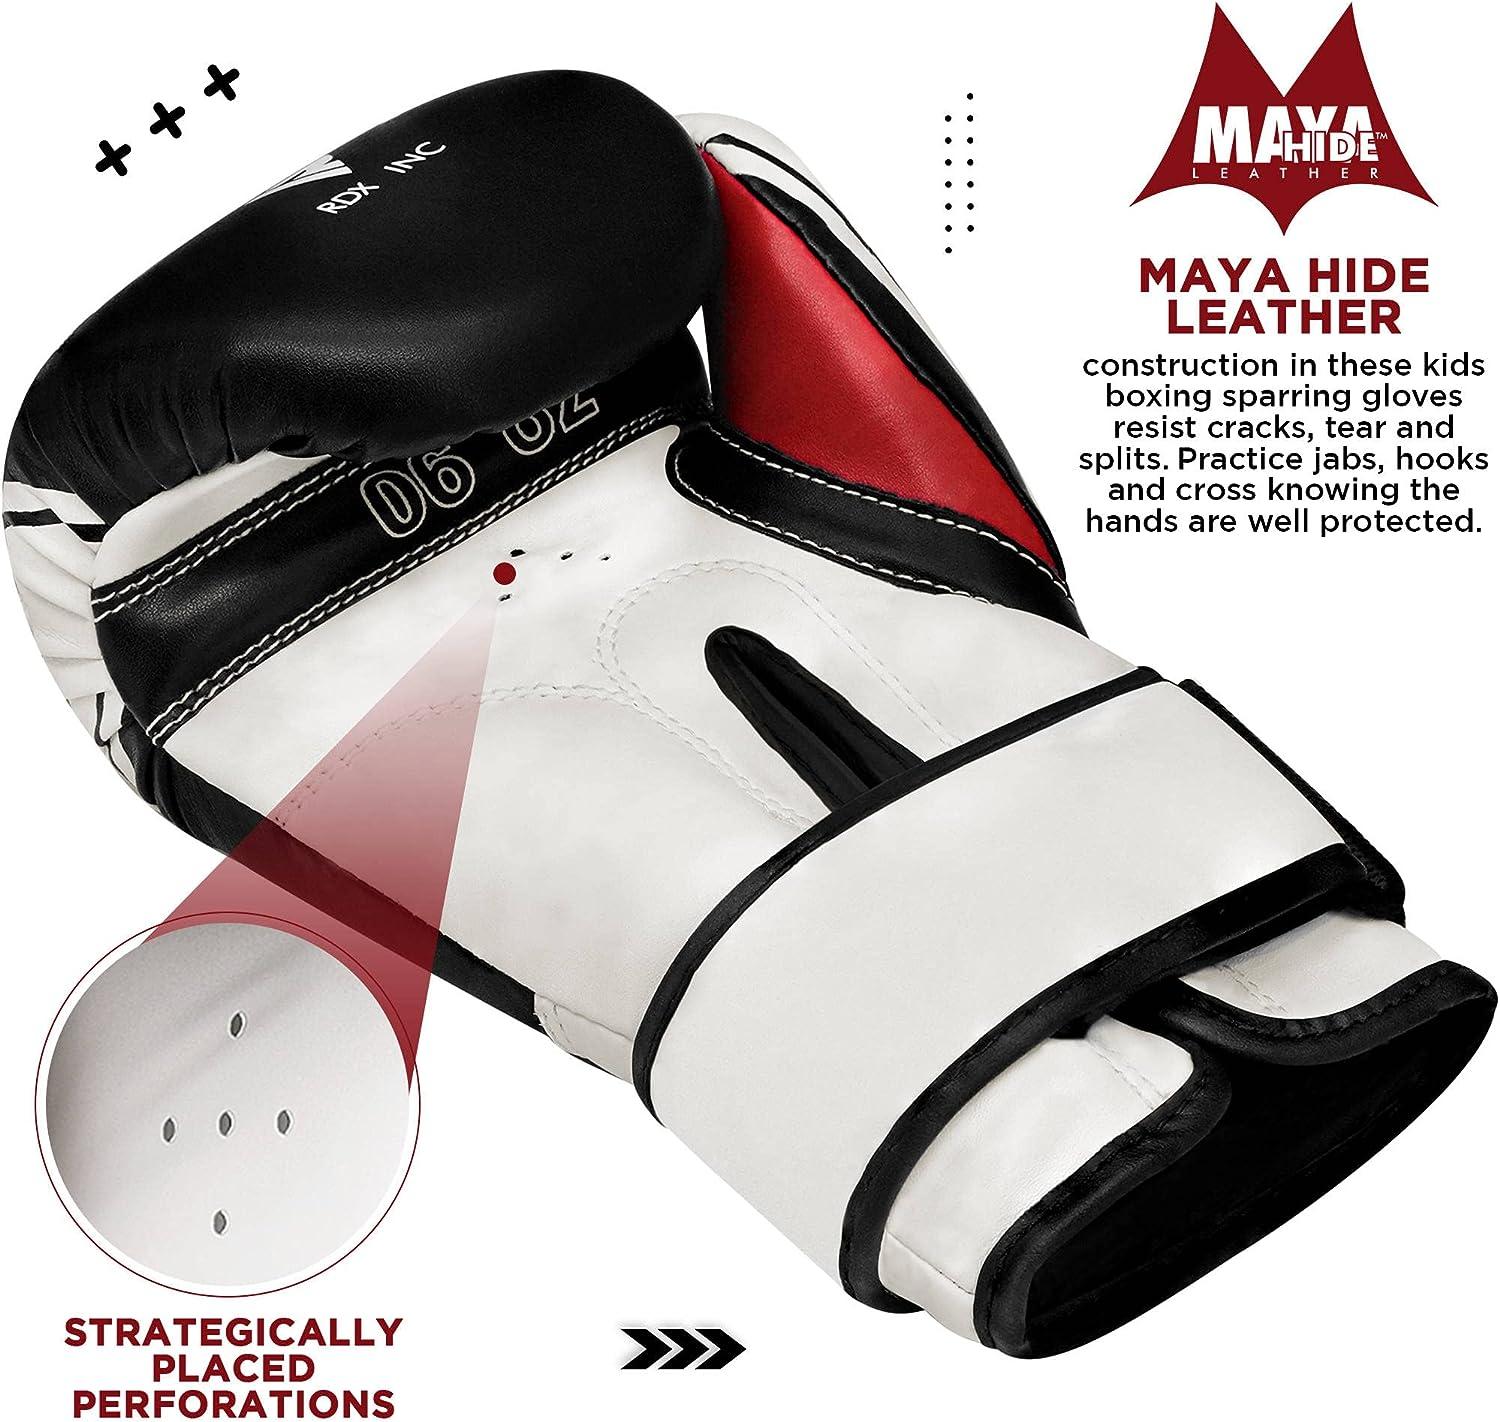 RDX MMA Hybrid Sparring Gloves, Maya Hide Leather, Open Ventilated Palm,  Padded Mitts Martial Arts Kickboxing Muay Thai Training Cage Fighting, Men  Adult, Punching Bag and Pads Workout, Training Gloves 